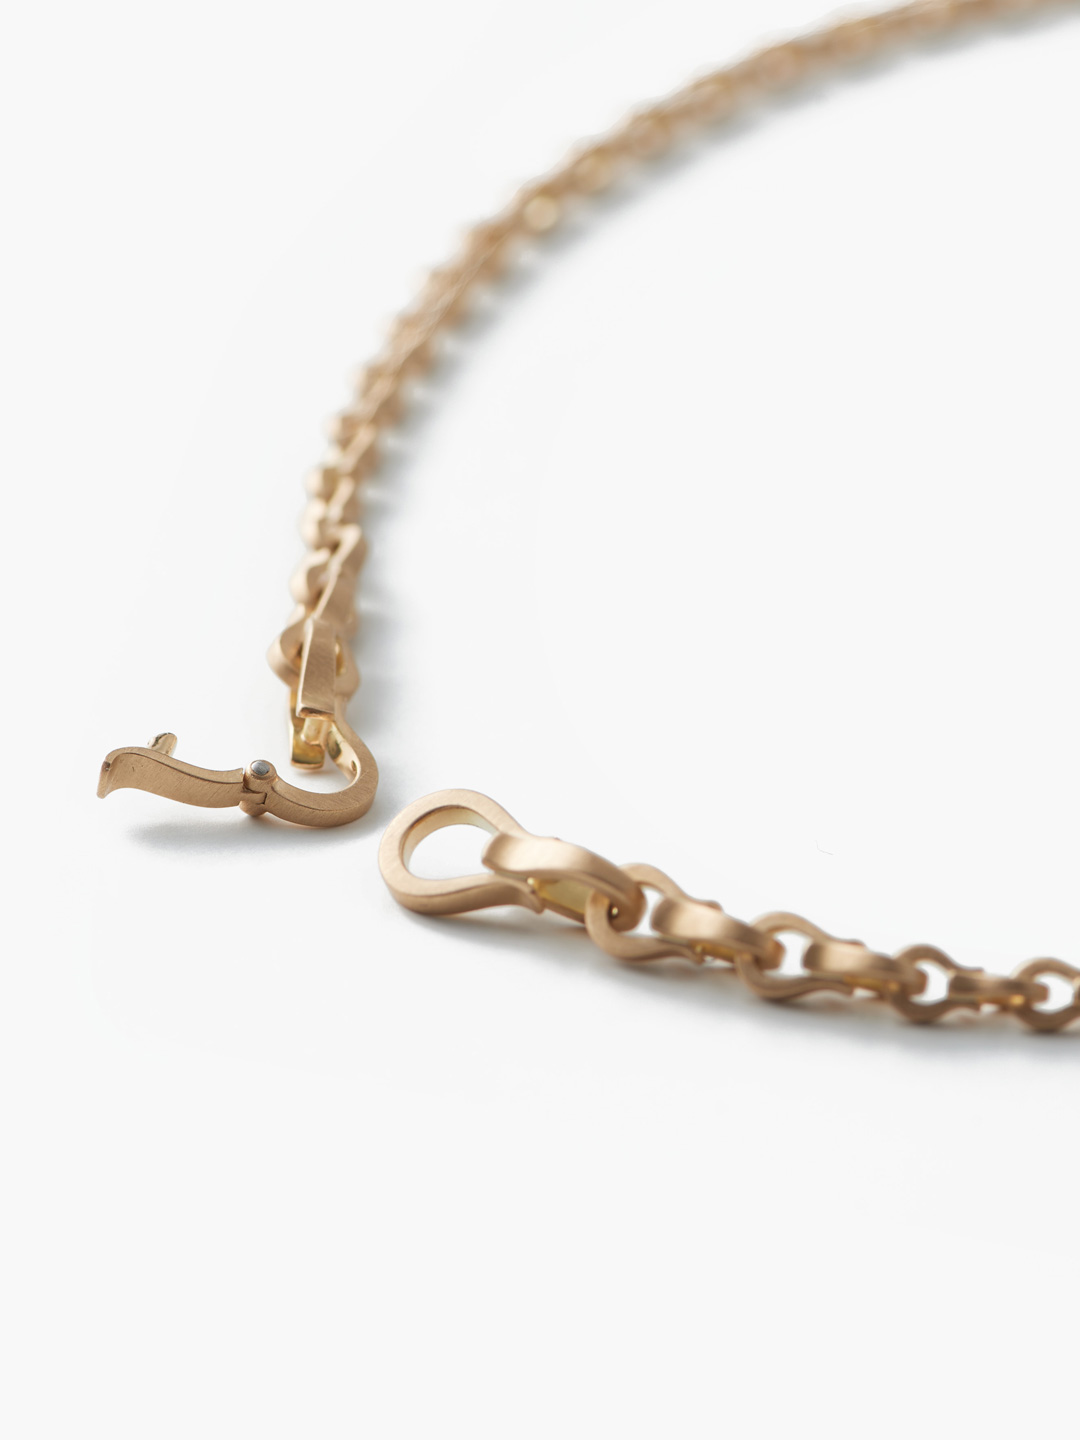 The Symbol Of Refined Metal Necklace - Yellow Gold